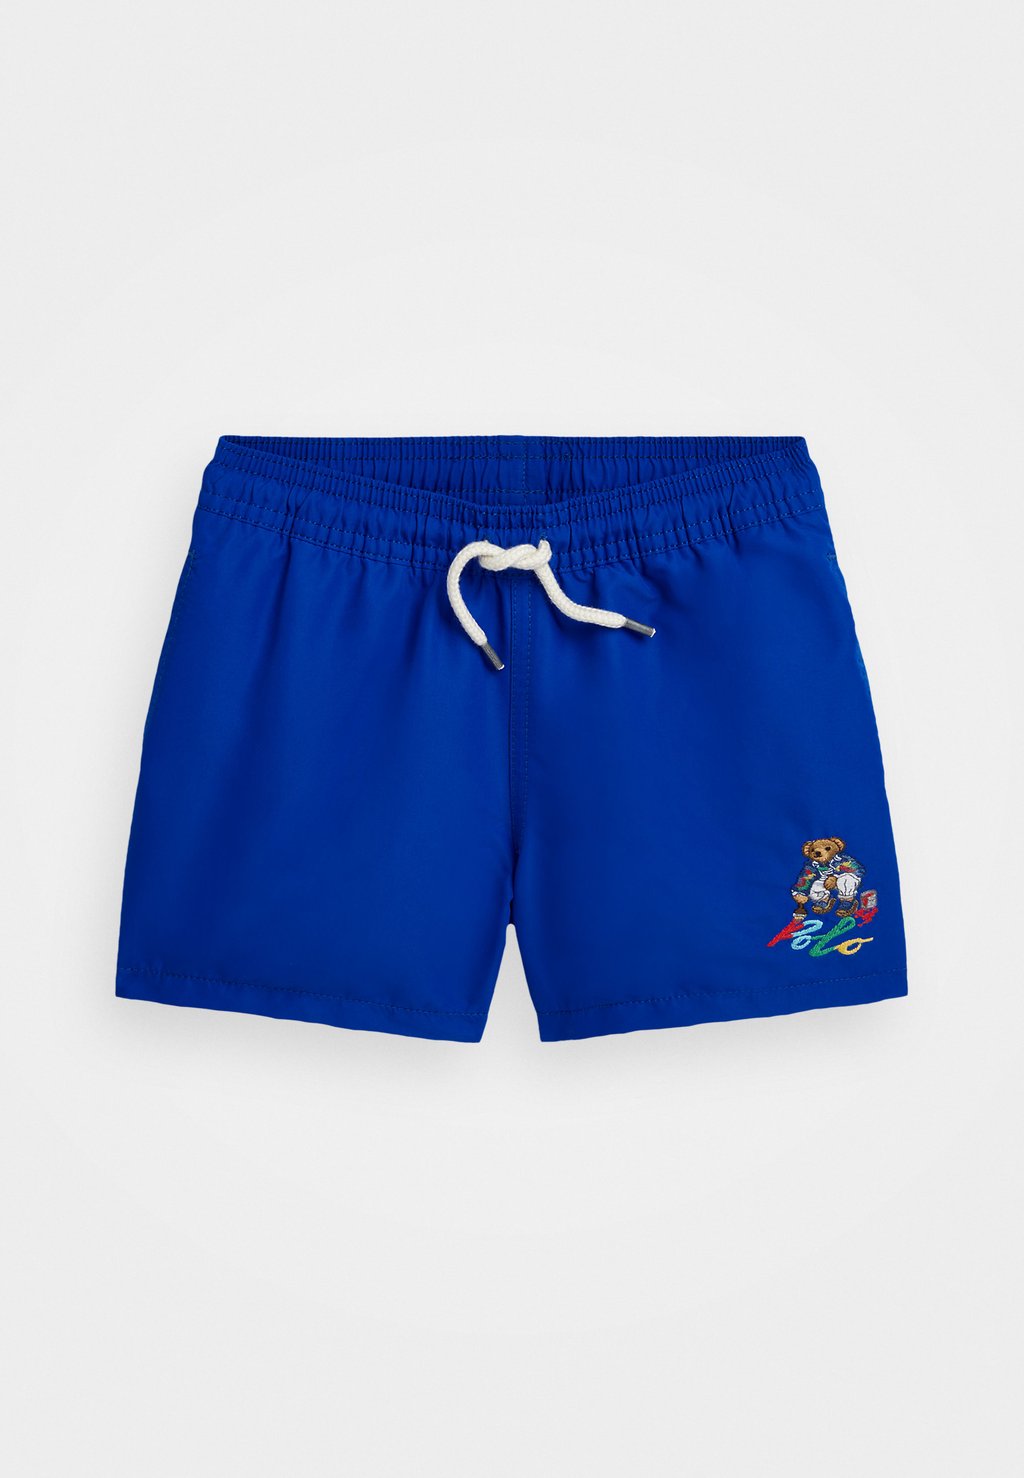 Шорты для плавания TRAVELER SWIMWEAR TRUNK Polo Ralph Lauren, цвет rugby royal 2020 panthers melbourne storm rabbitohs maori broncos roosters eels rugby jersey rugby polo